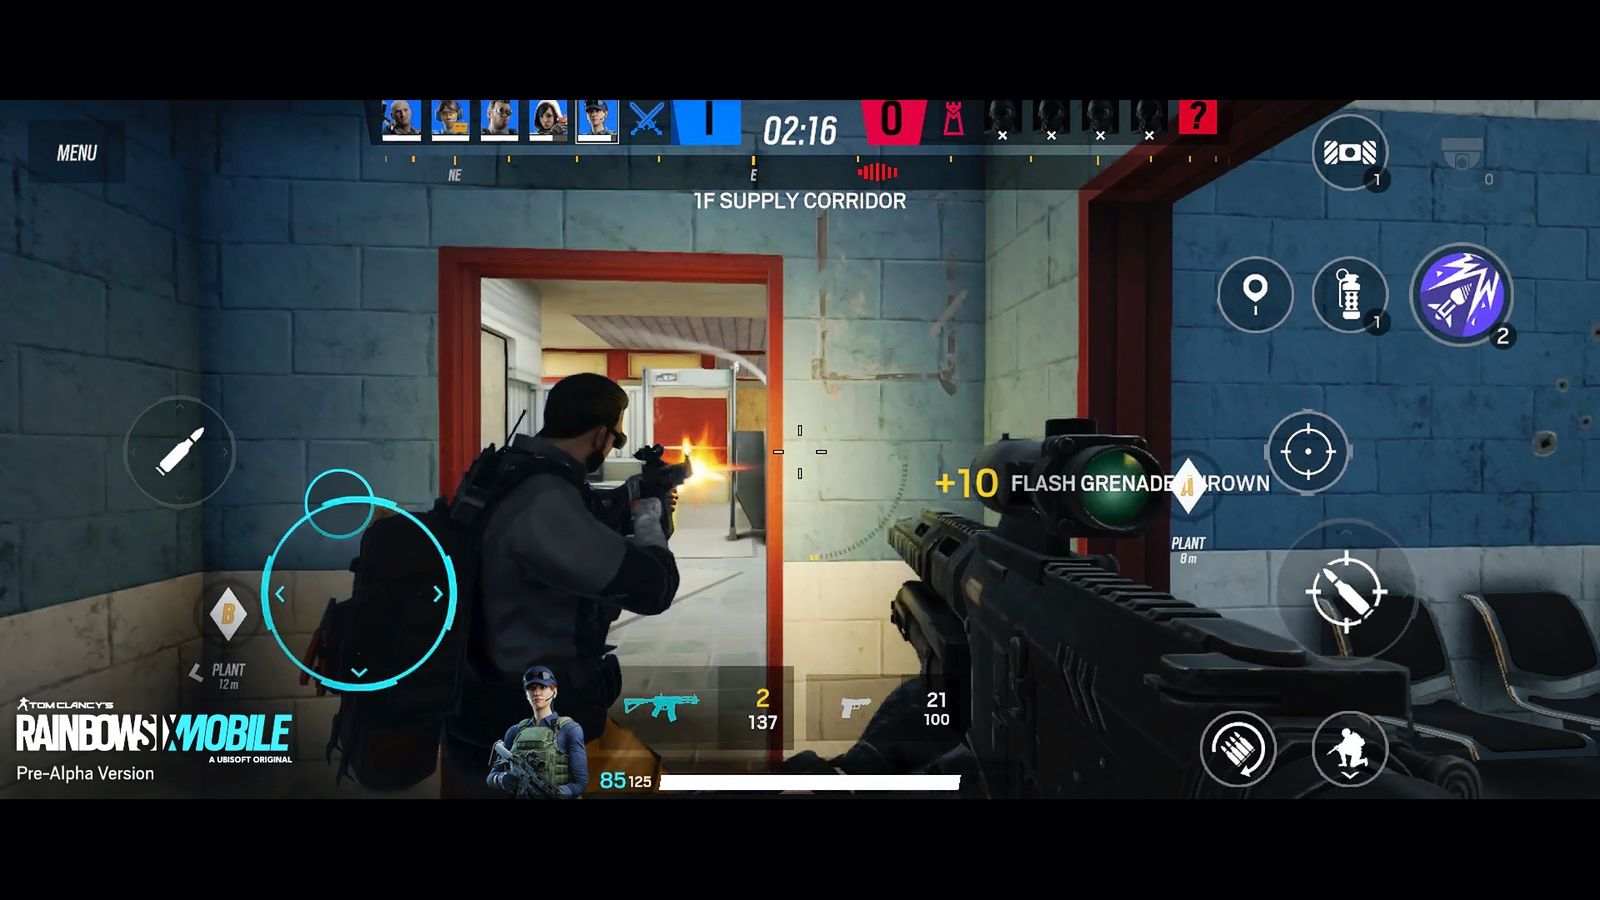 Image of the HUD in Rainbow Six Mobile